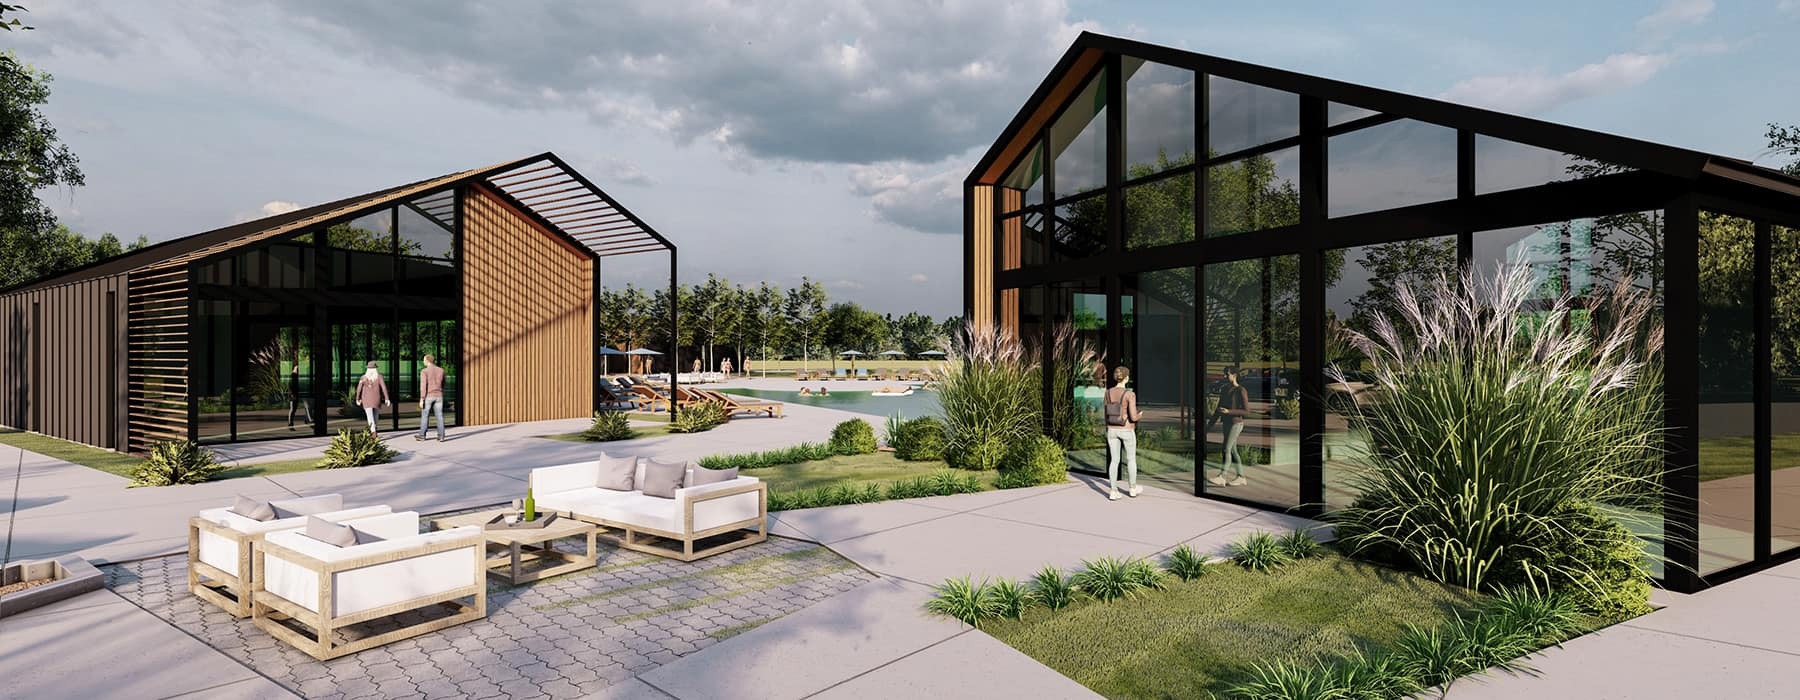 rendering of lounge buildings with all-glass walls and beside modern, easy-accessible pool and southern-style landscaping